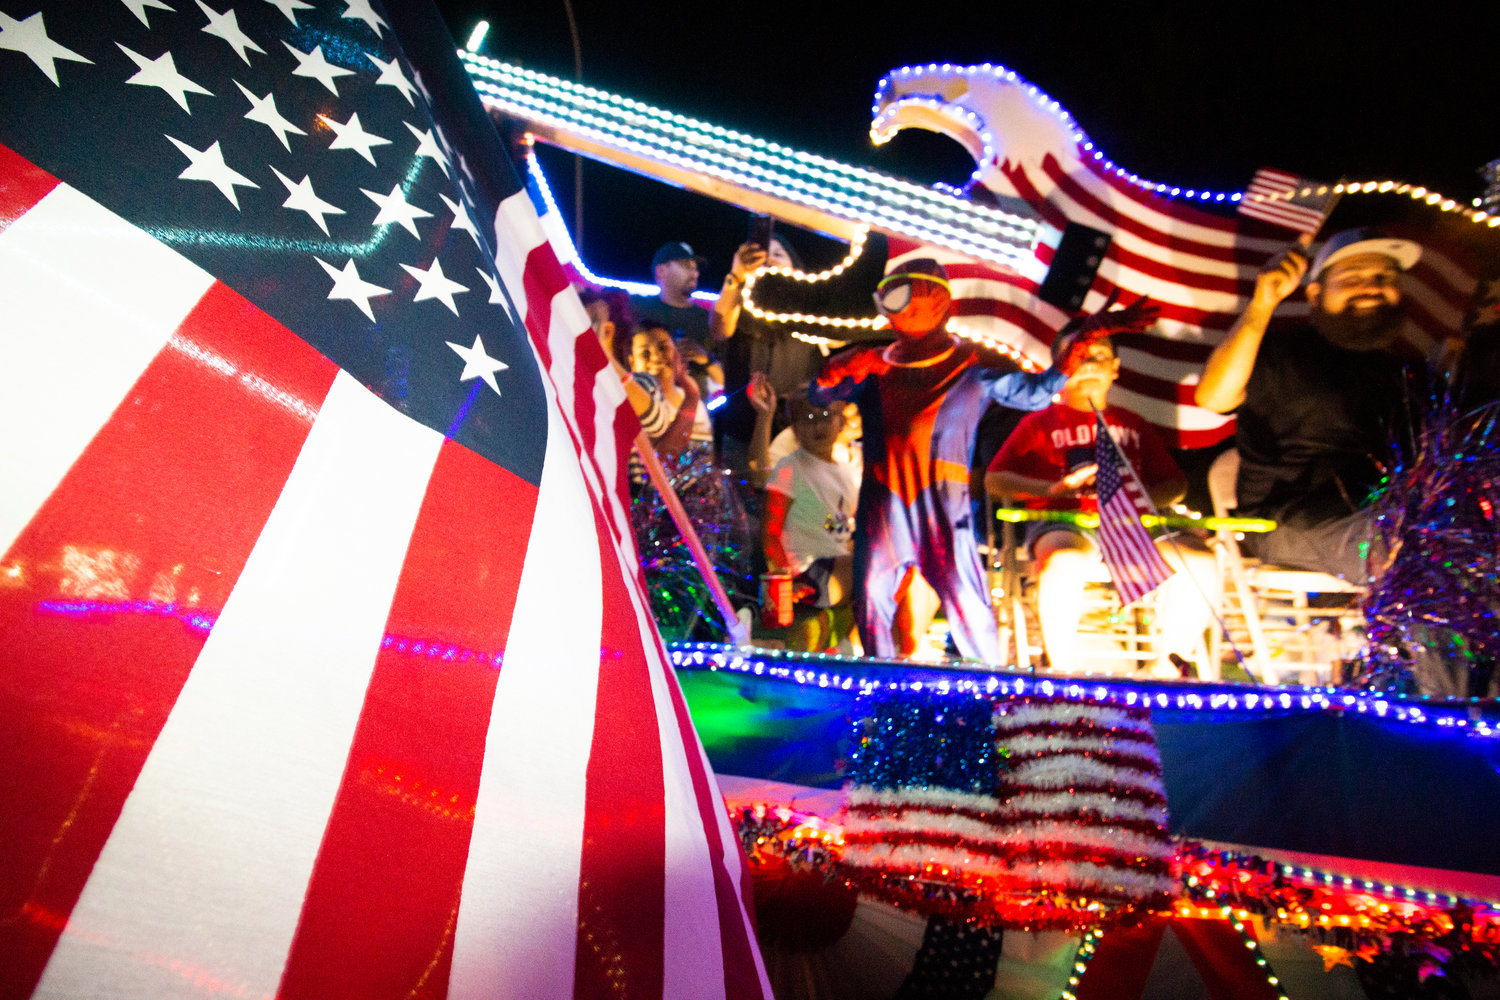 The Zia Natural Gas float was a standout with its bright patriotic colors going down Hadley Avenue off Solano Drive during the 2019 Las Cruces Electric Light Parade. The parade is back this year July 3.